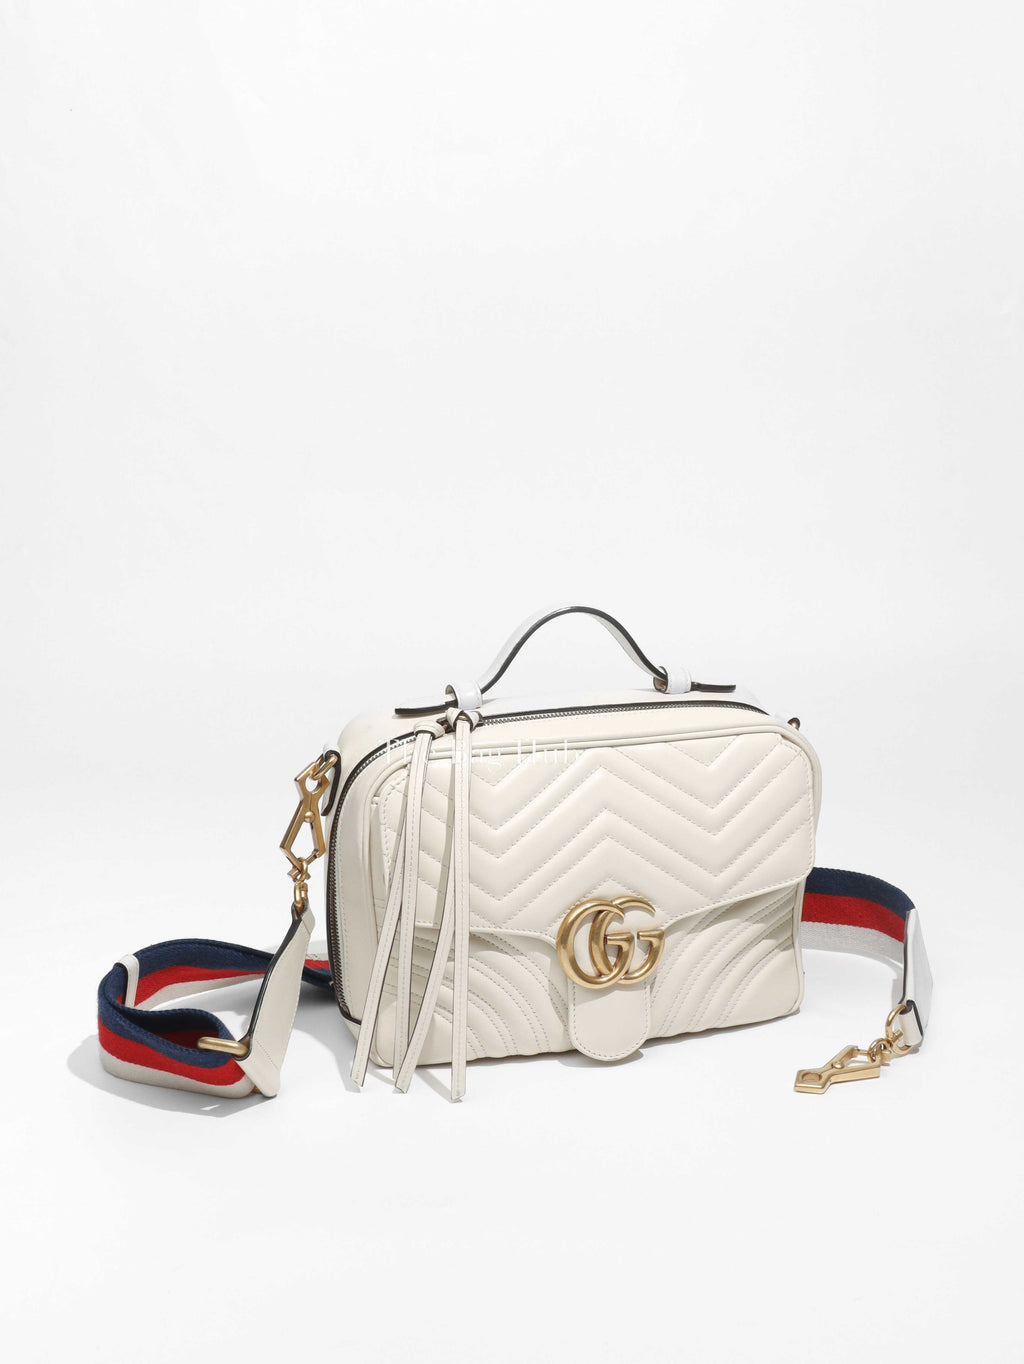 Gucci White Leather GG Marmont Top Handle Small Bag - 1